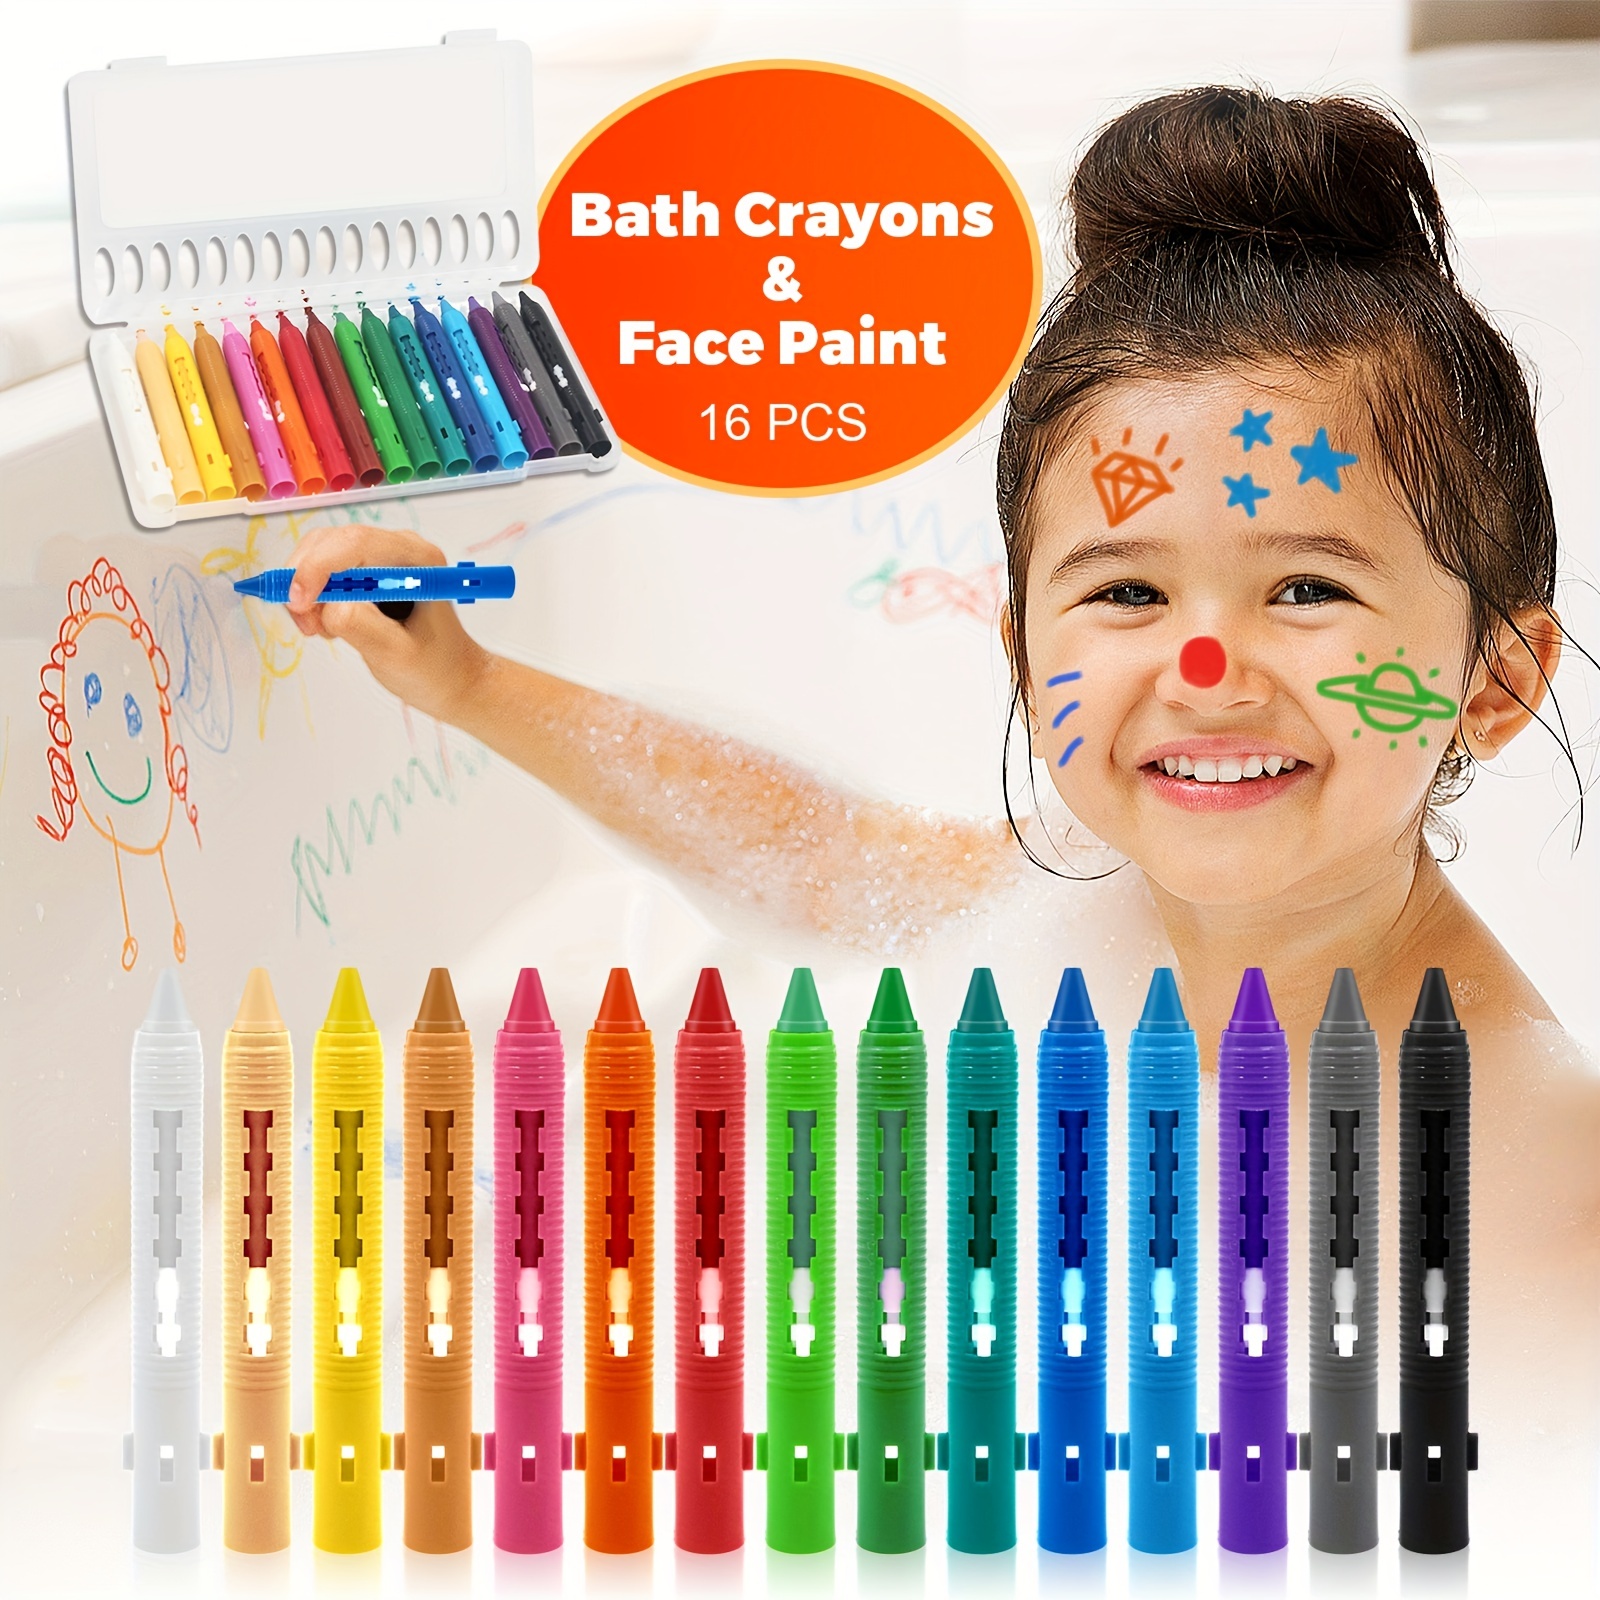 12pcs Space-themed Twistable Crayons, Non-toxic & -friendly Art Painting  Coloring Tools For Children